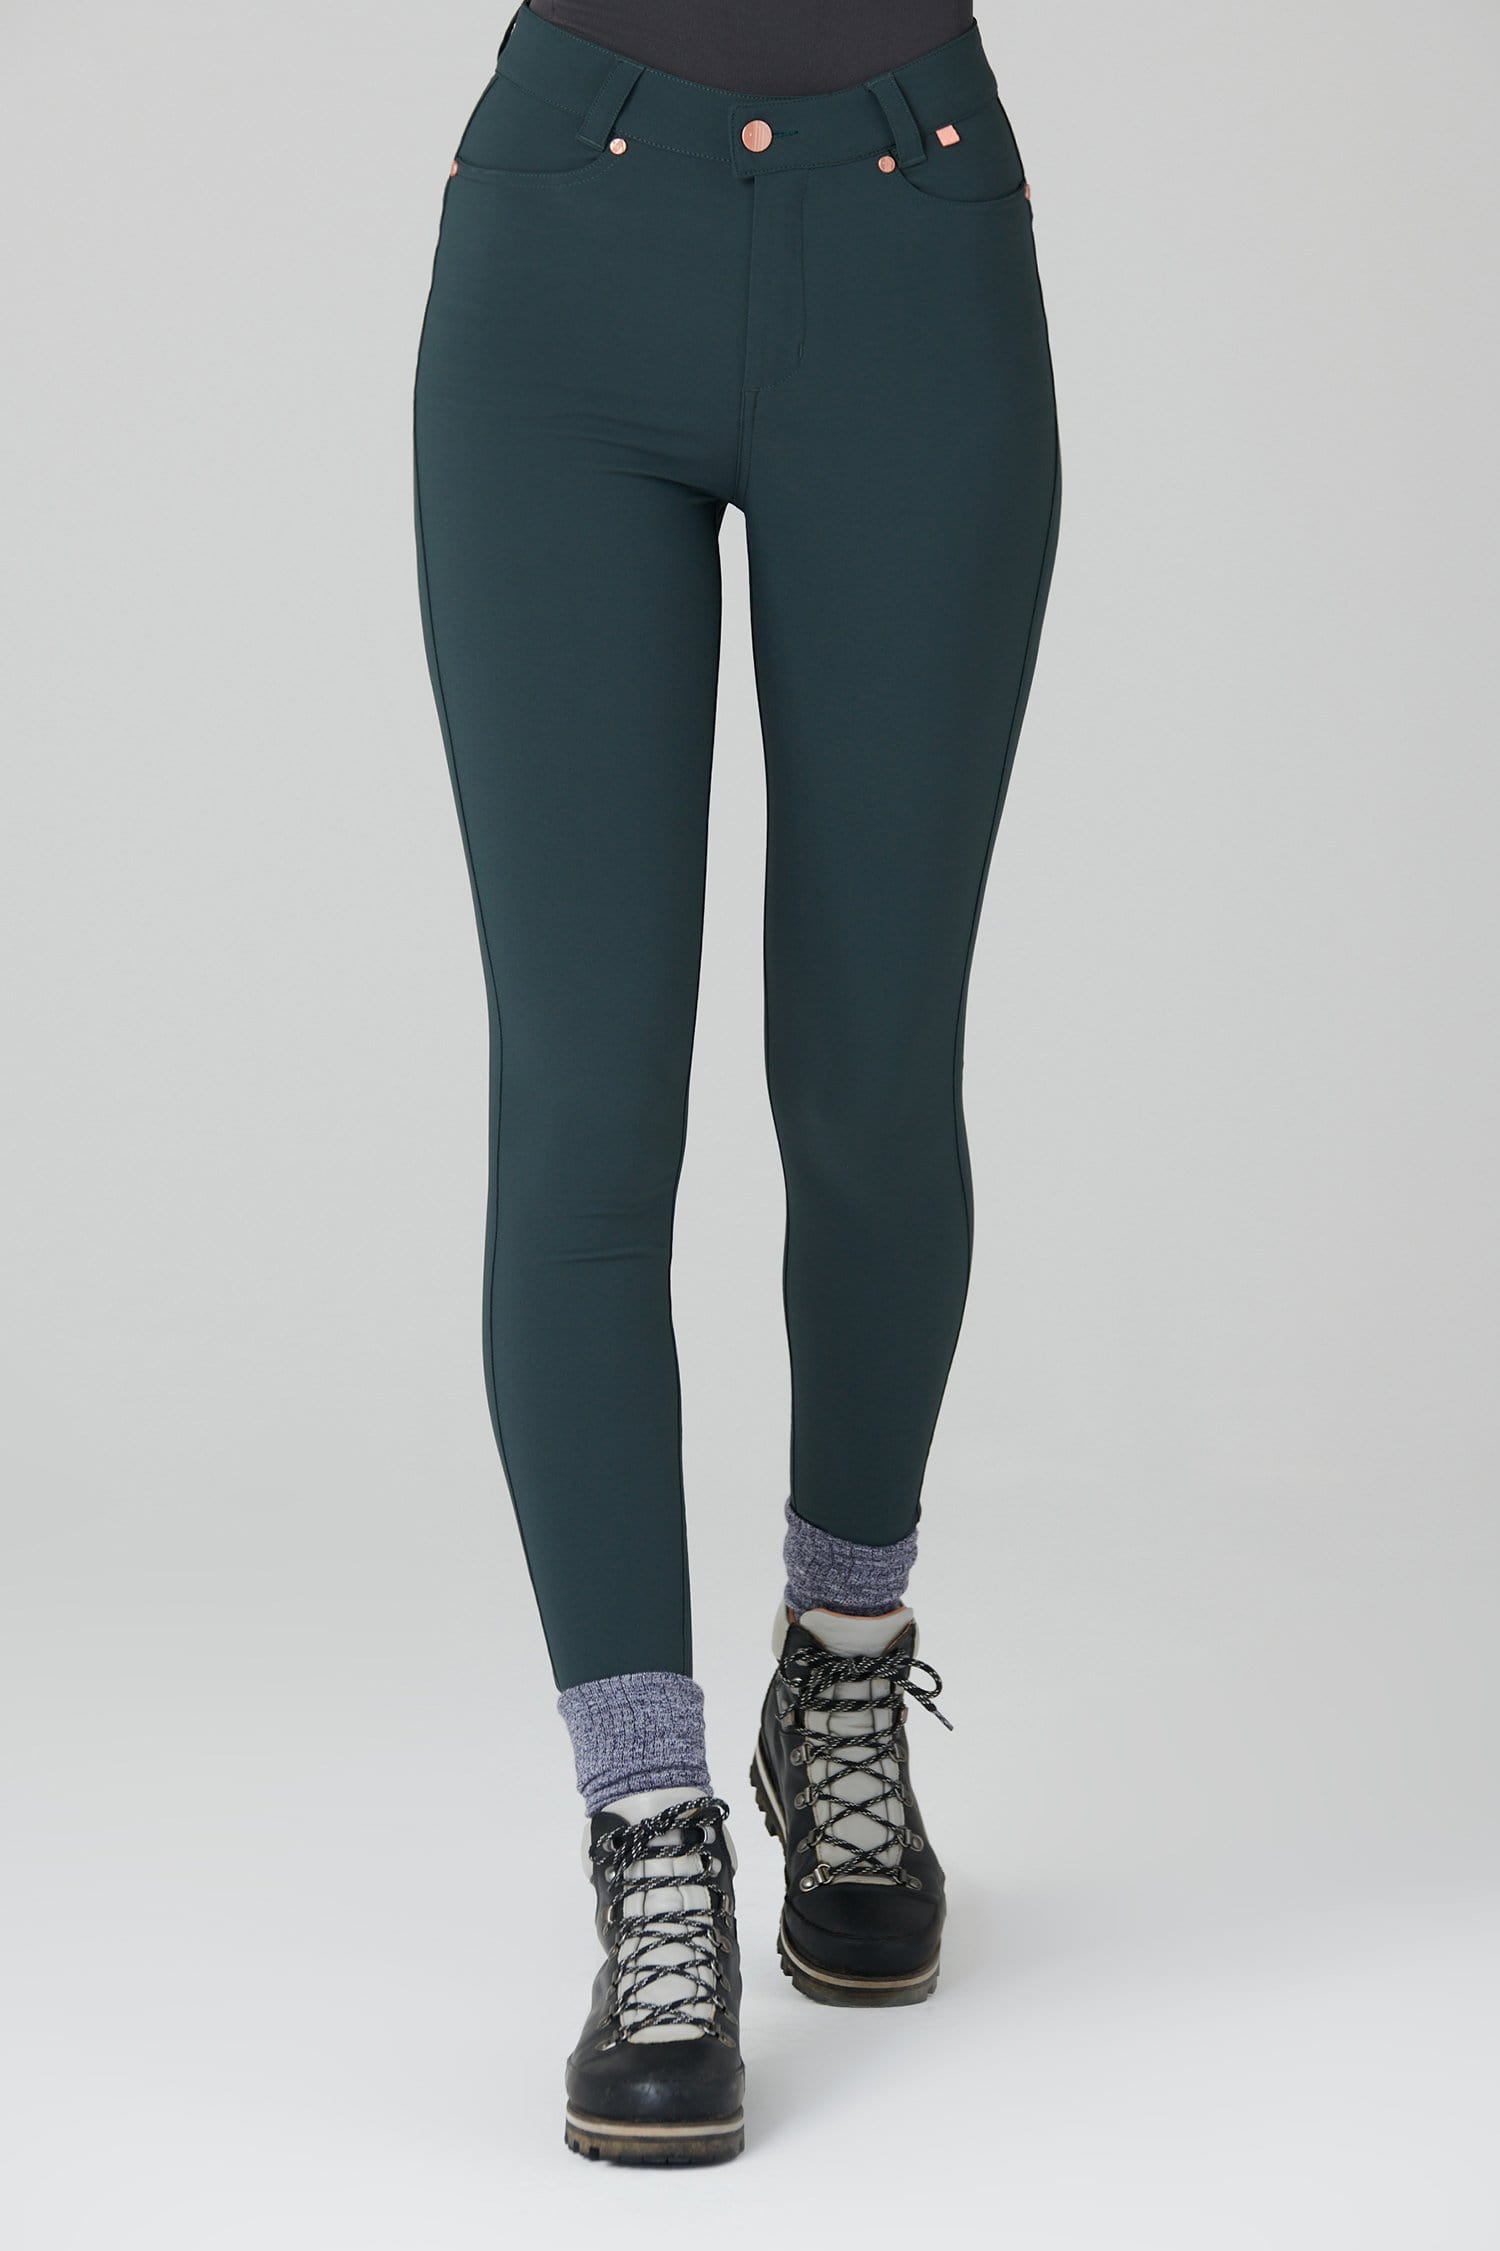 Thermal Skinny Outdoor Trousers - Forest Green - 28r / Uk10 - Womens - Acai Outdoorwear